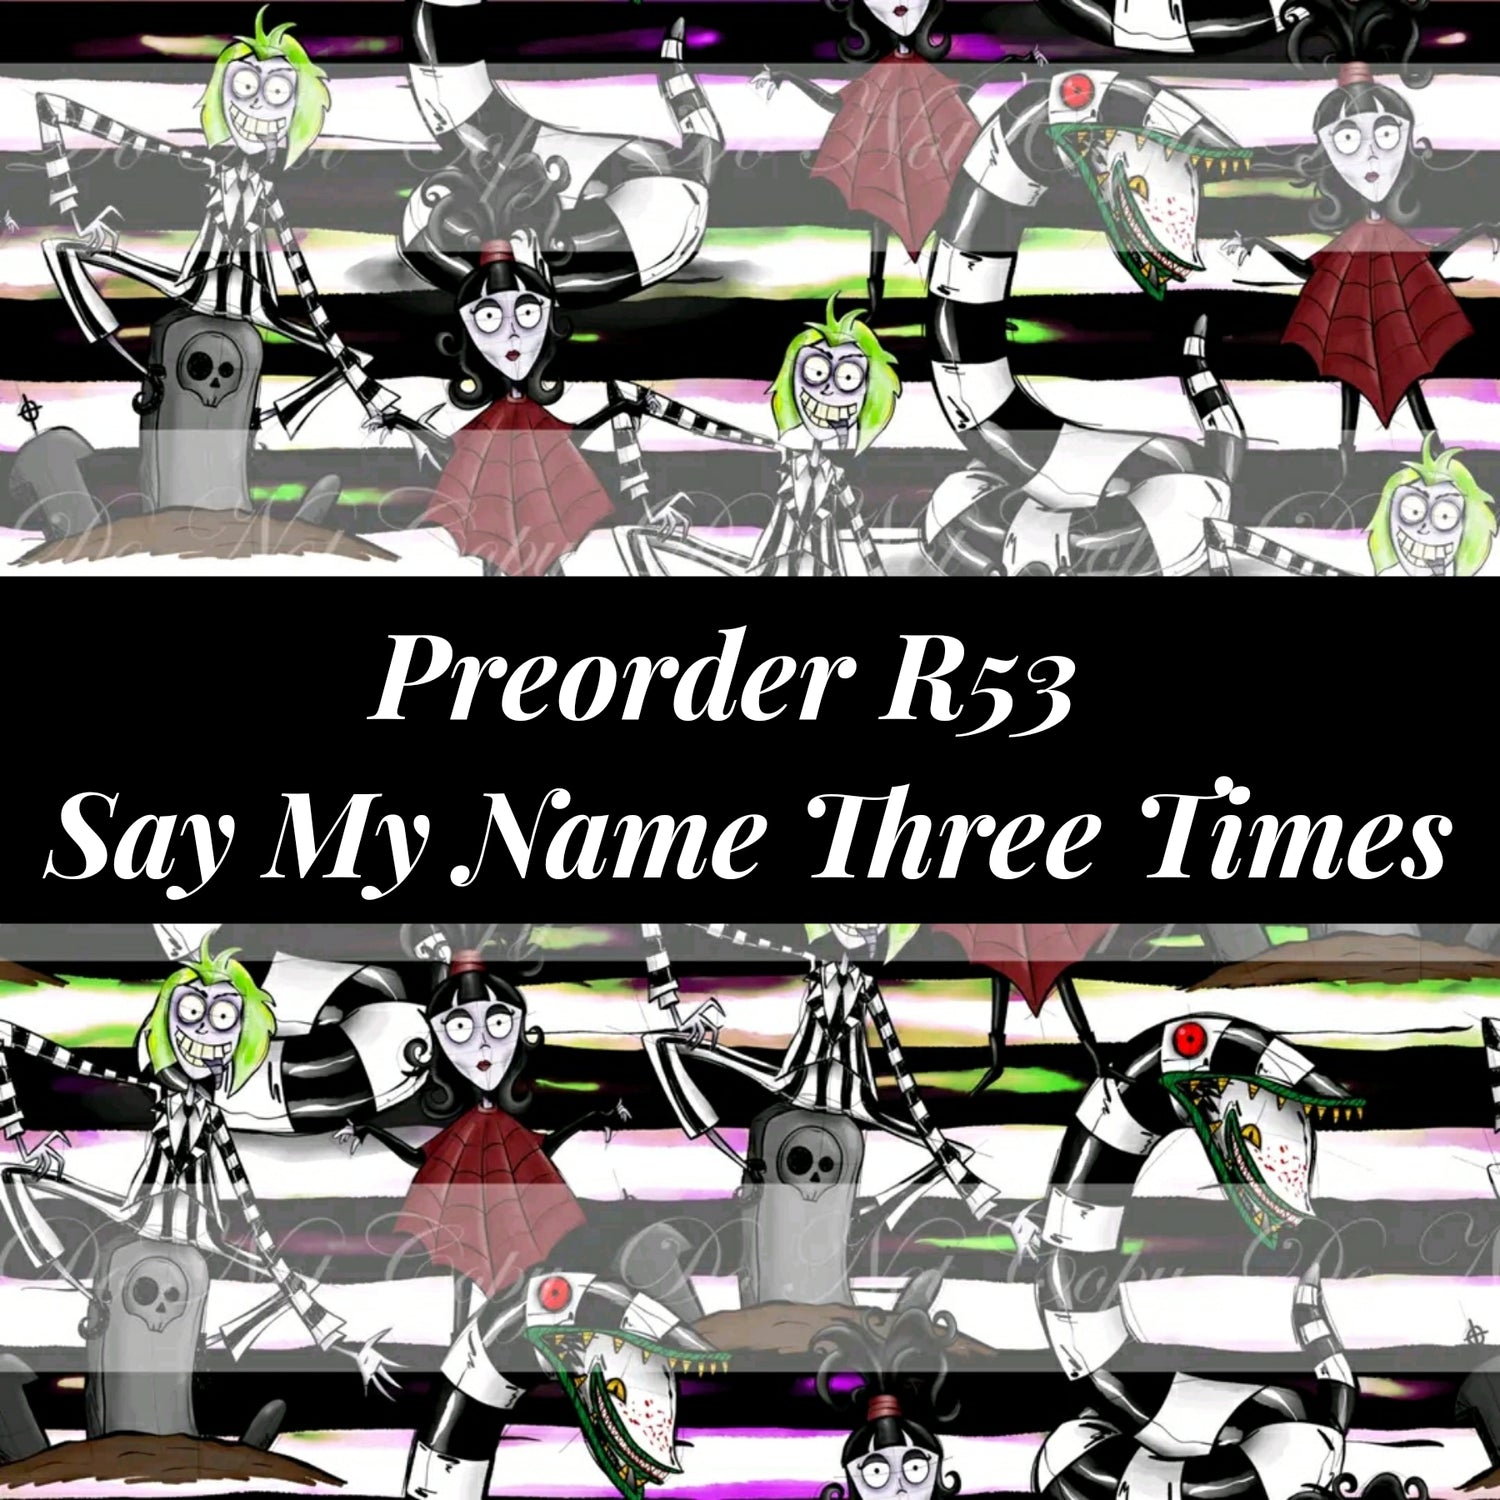 Preorder R53 Say My Name Three Times